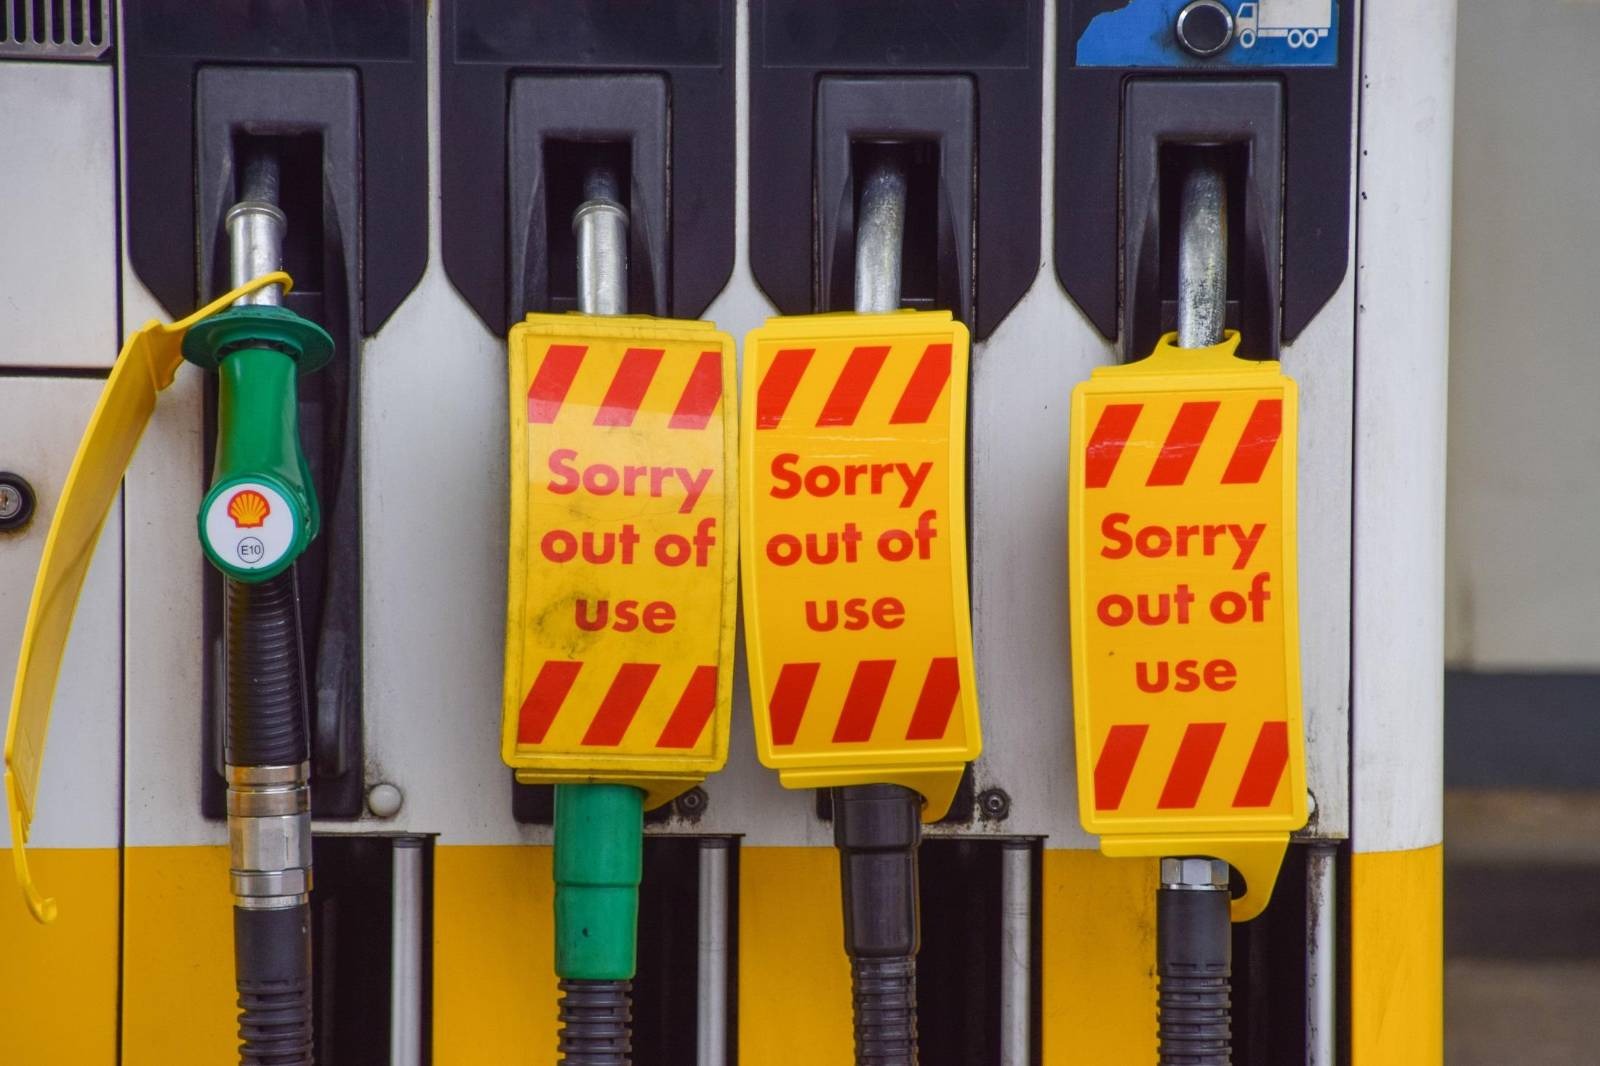 Doubts Over Shell S Drive Carbon Neutral Claim Unearthed